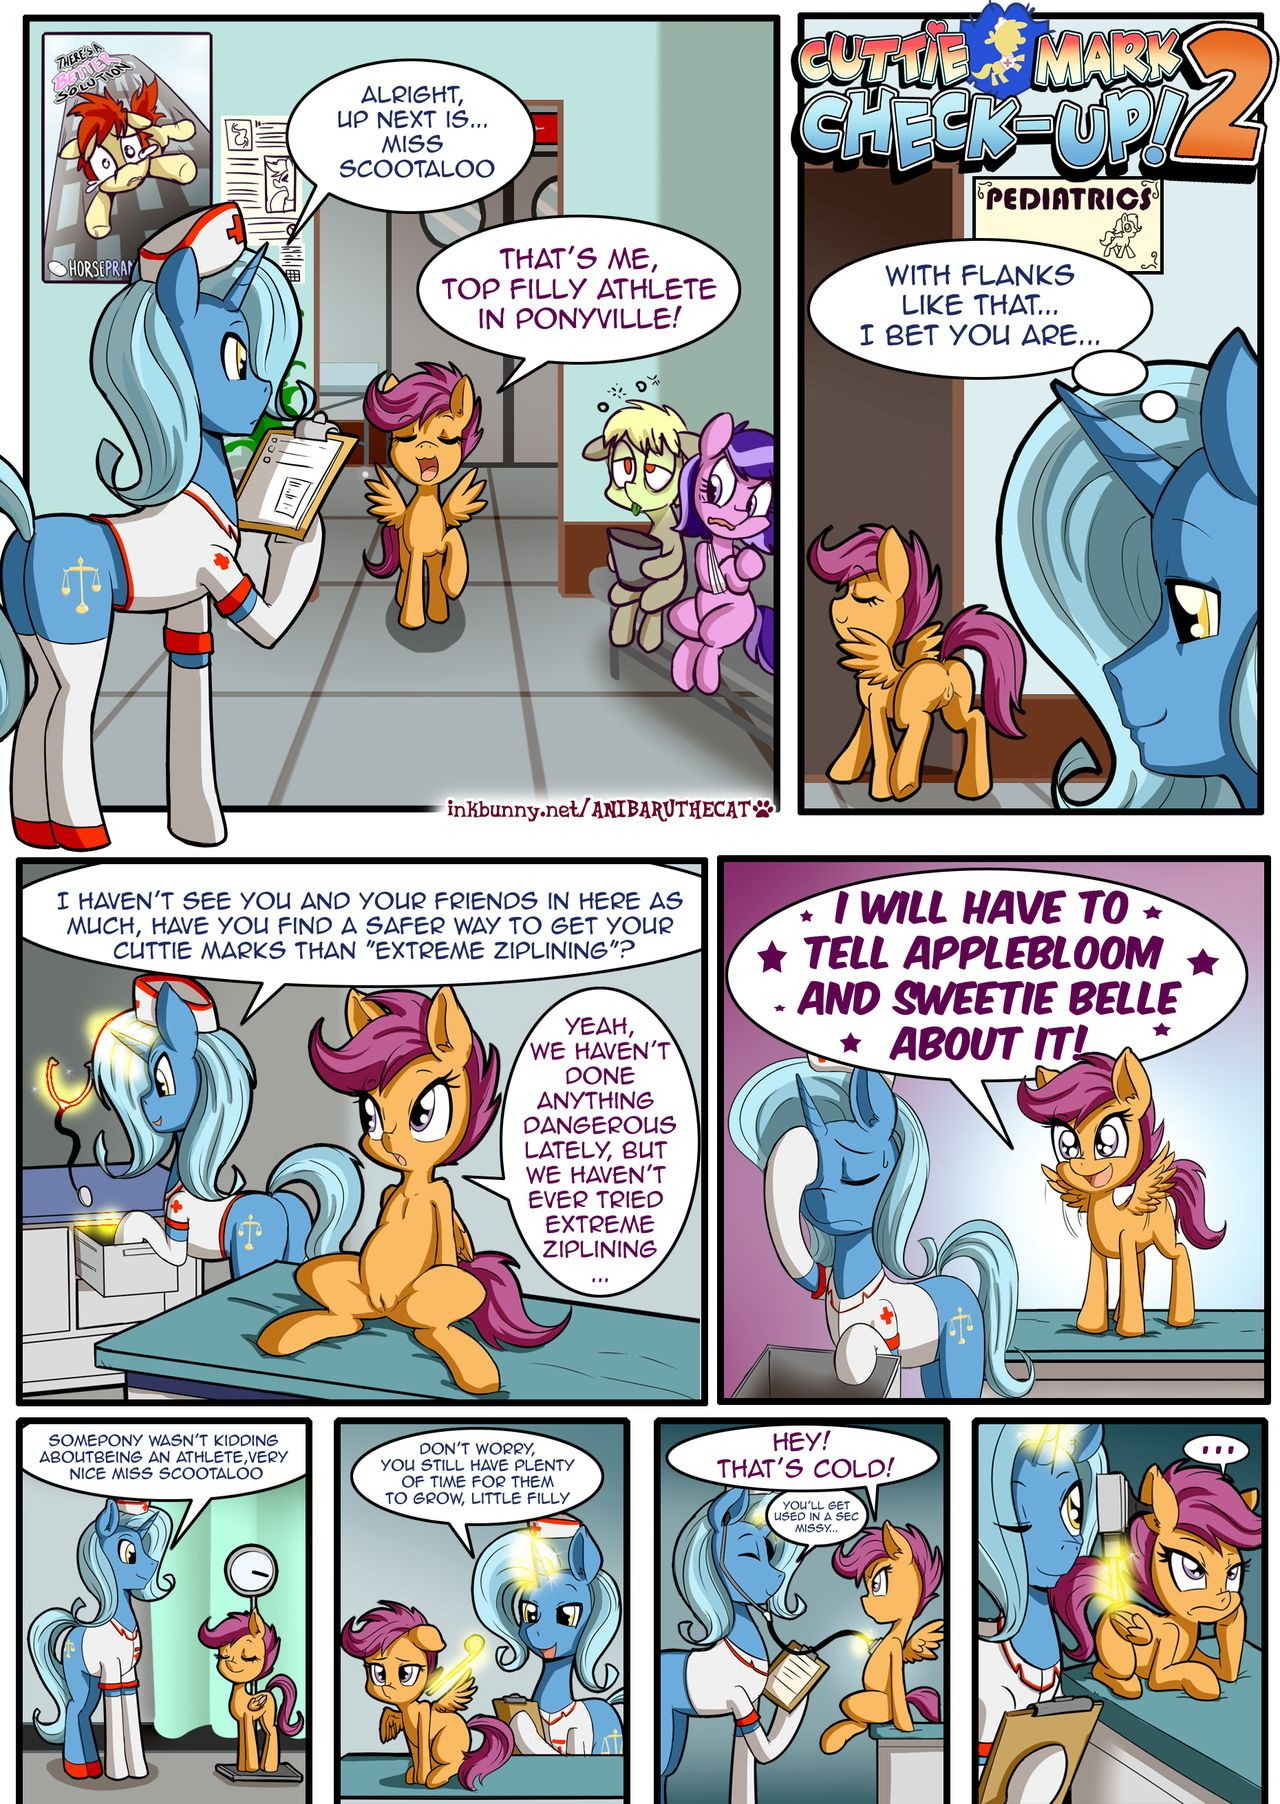 Cutie Mark Check-Up! 2 - Page 3